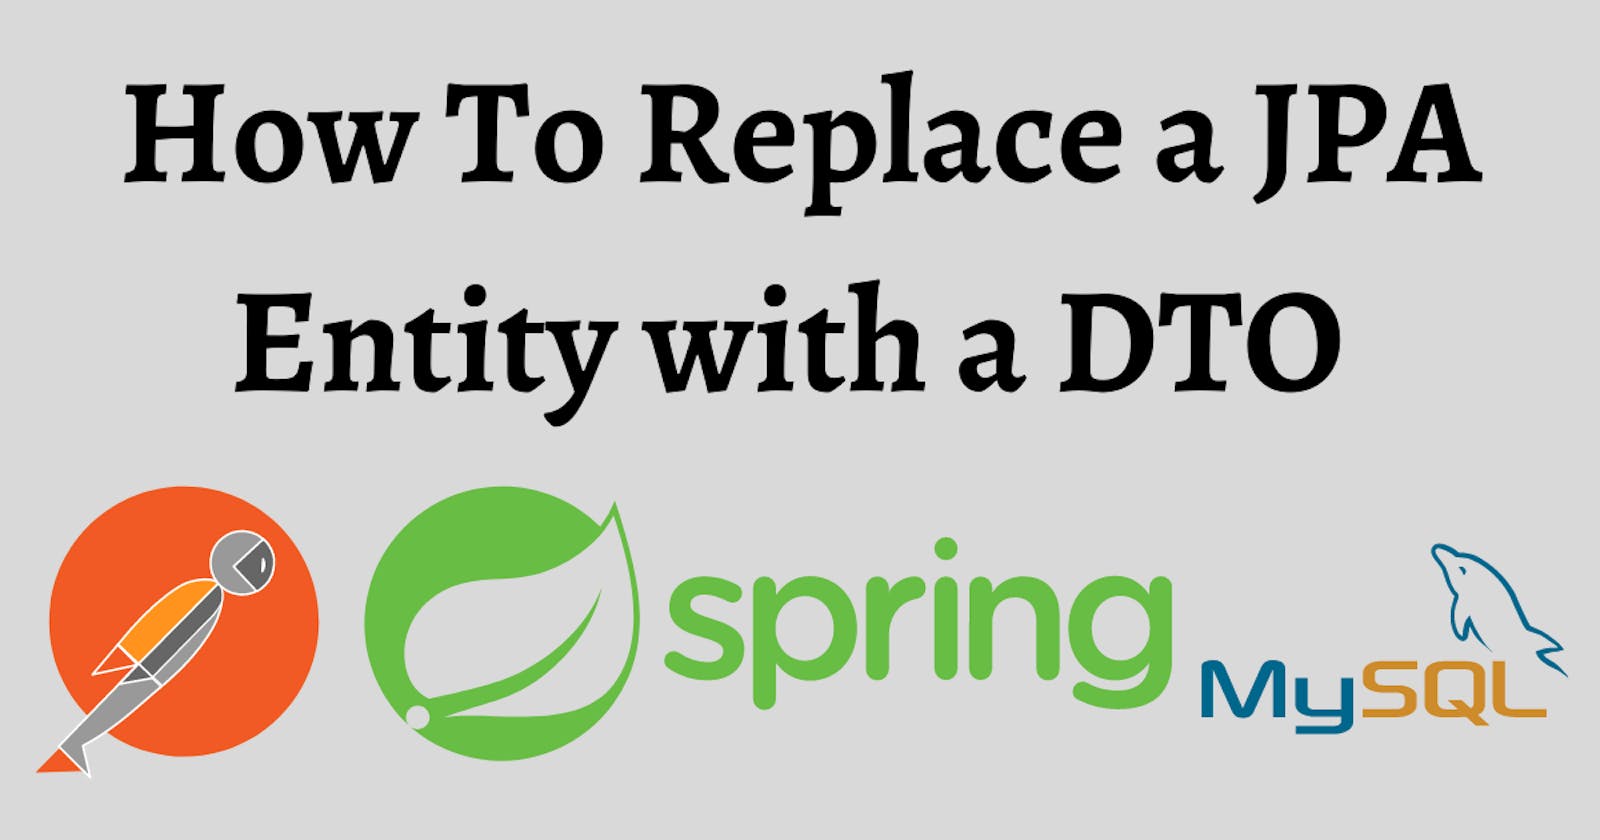 Replace a JPA entity with a DTO